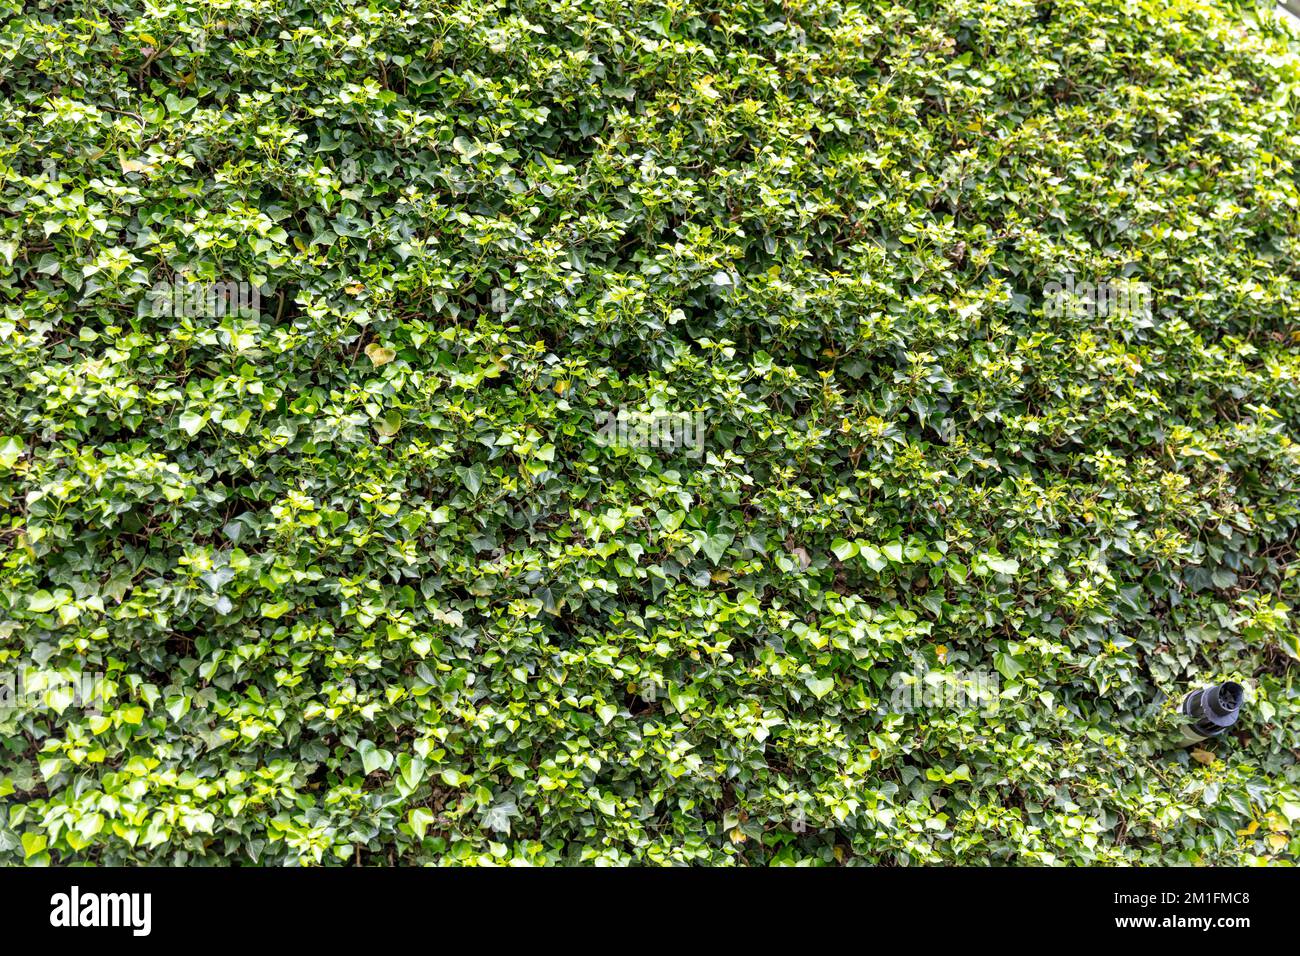 Ivy covering a whole wall, Ivy on wall, ivy, green ivy, covering, blanketing, UK, England, wallpaper, cover, camouflage, green leaves, ivy leaves, Ivy Stock Photo